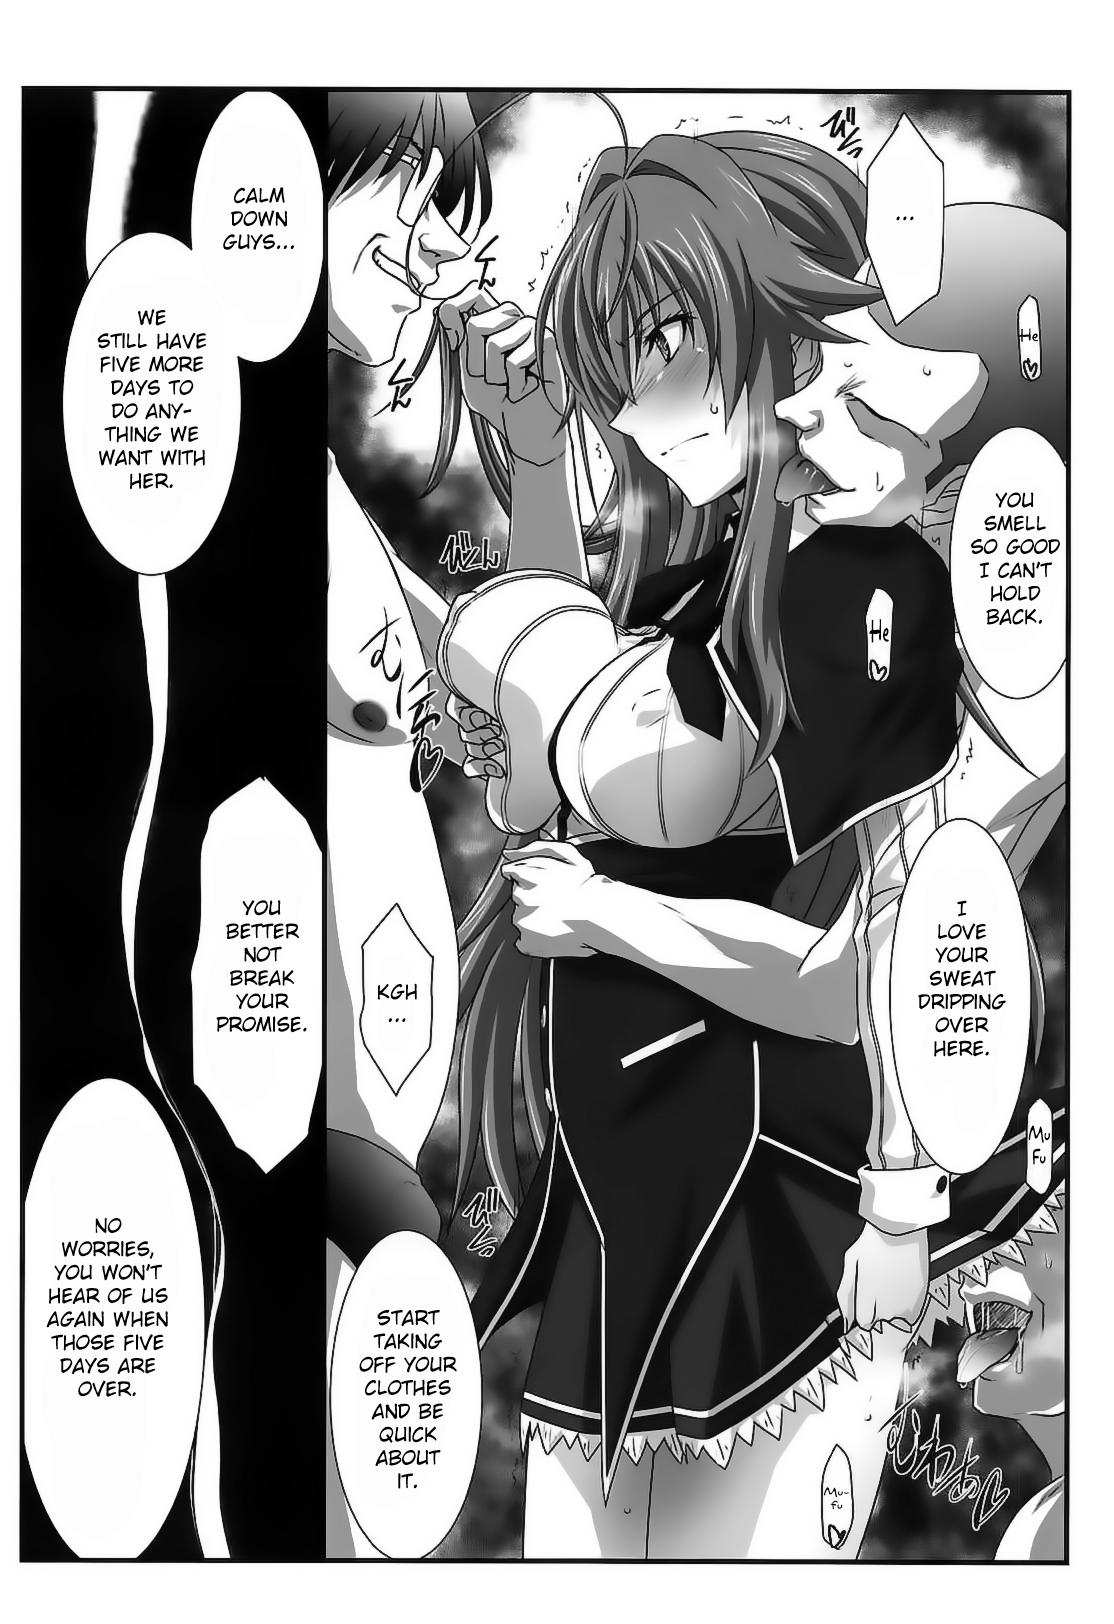 Gayhardcore SPIRAL ZONE DxD II - Highschool dxd Cartoon - Page 5